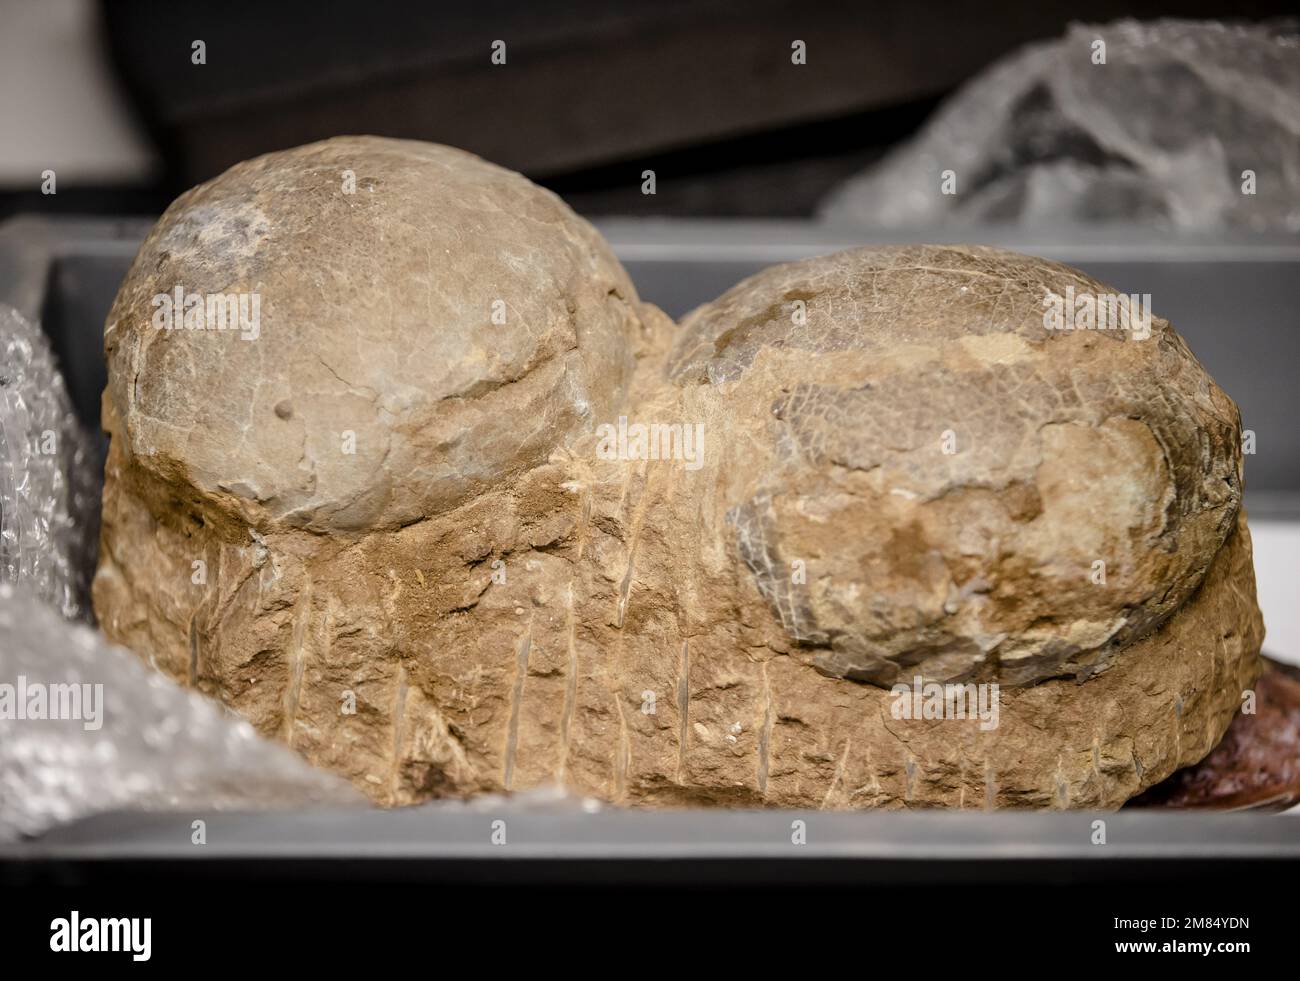 BOXTEL - Two dinosaur eggs in the Oertijdmuseum. The museum had 33 dinosaur eggs scanned at the Jeroen Bosch hospital in Den Bosch. The museum is looking for dinosaur embryos in the eggs. ANP SEM VAN DER WAL netherlands out - belgium out Stock Photo